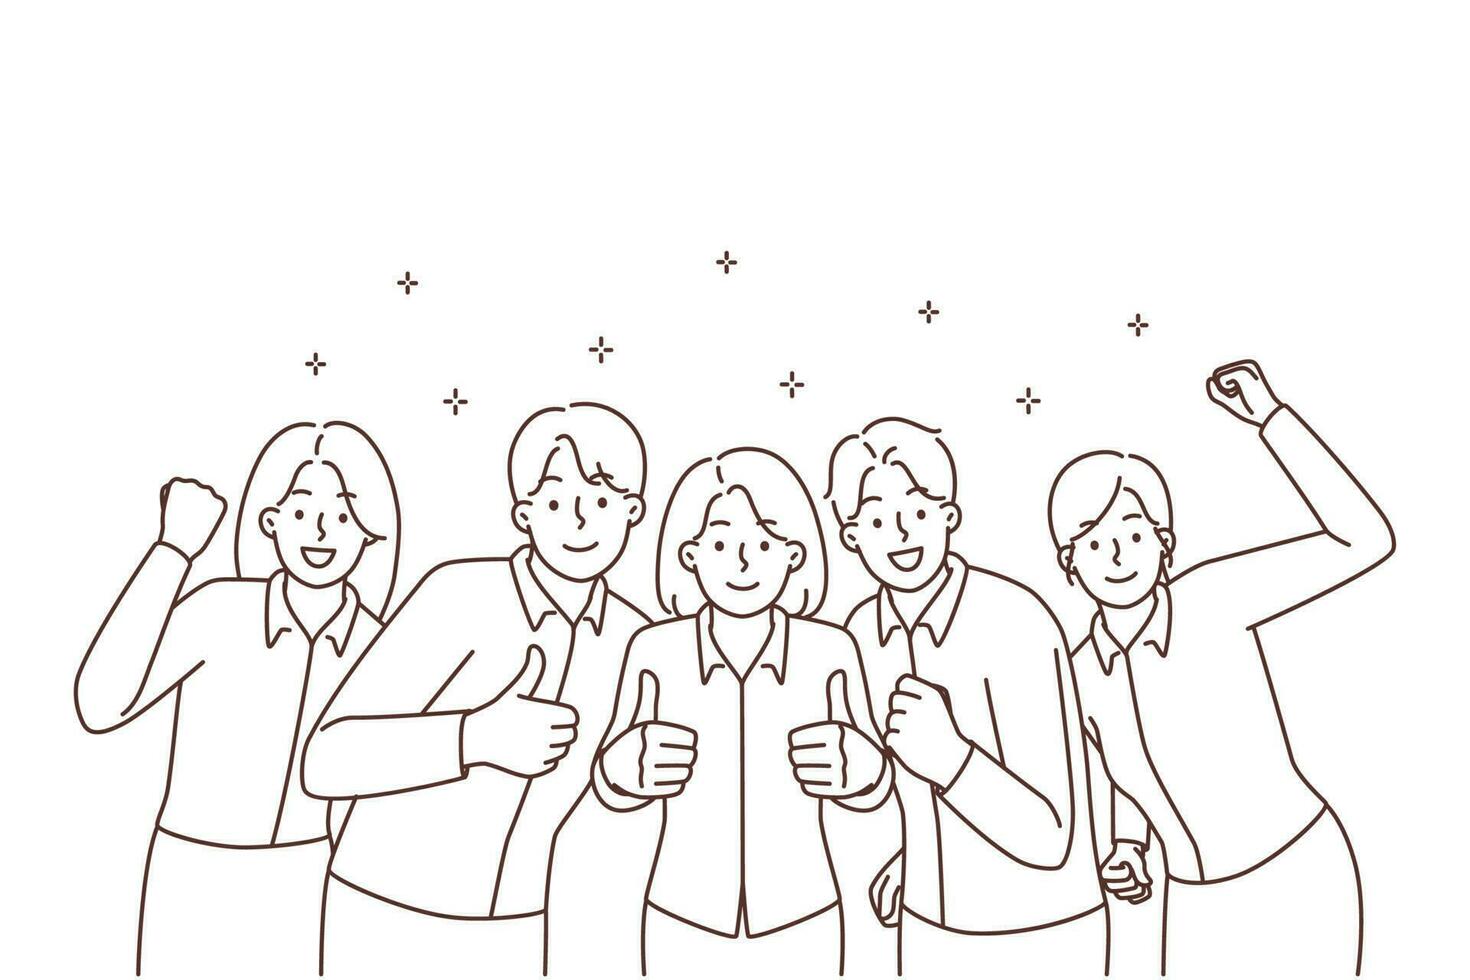 Group of smiling businesspeople showing thumbs up celebrating shared business success. Happy work team cheering enjoy good job results. Vector illustration. Teamwork.